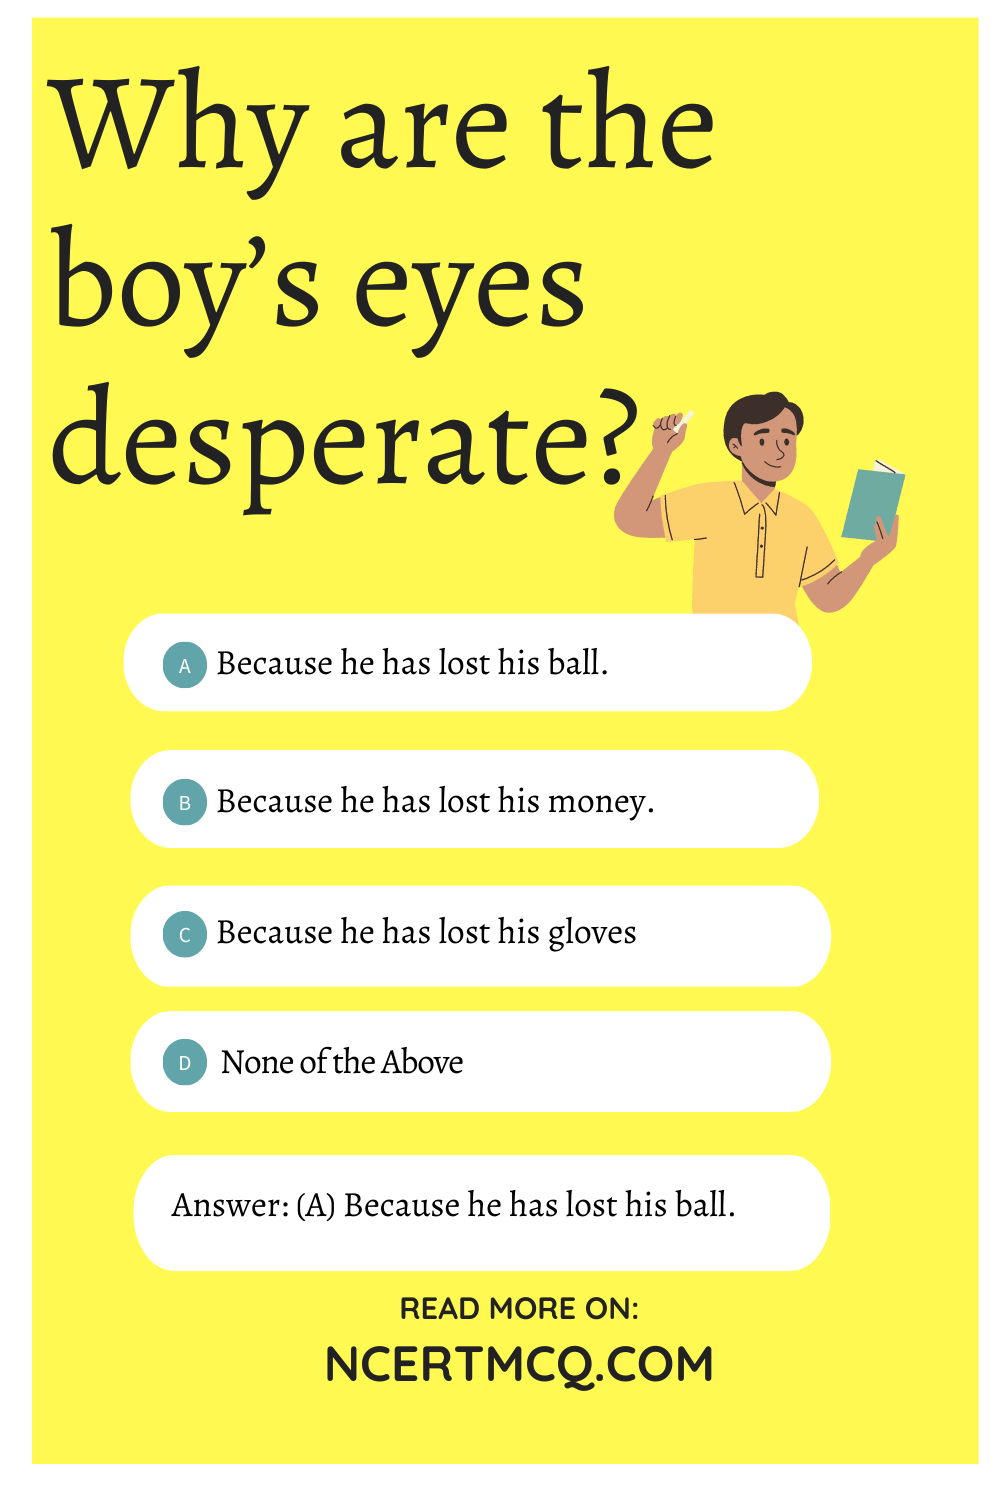 Why are the boy’s eyes desperate?